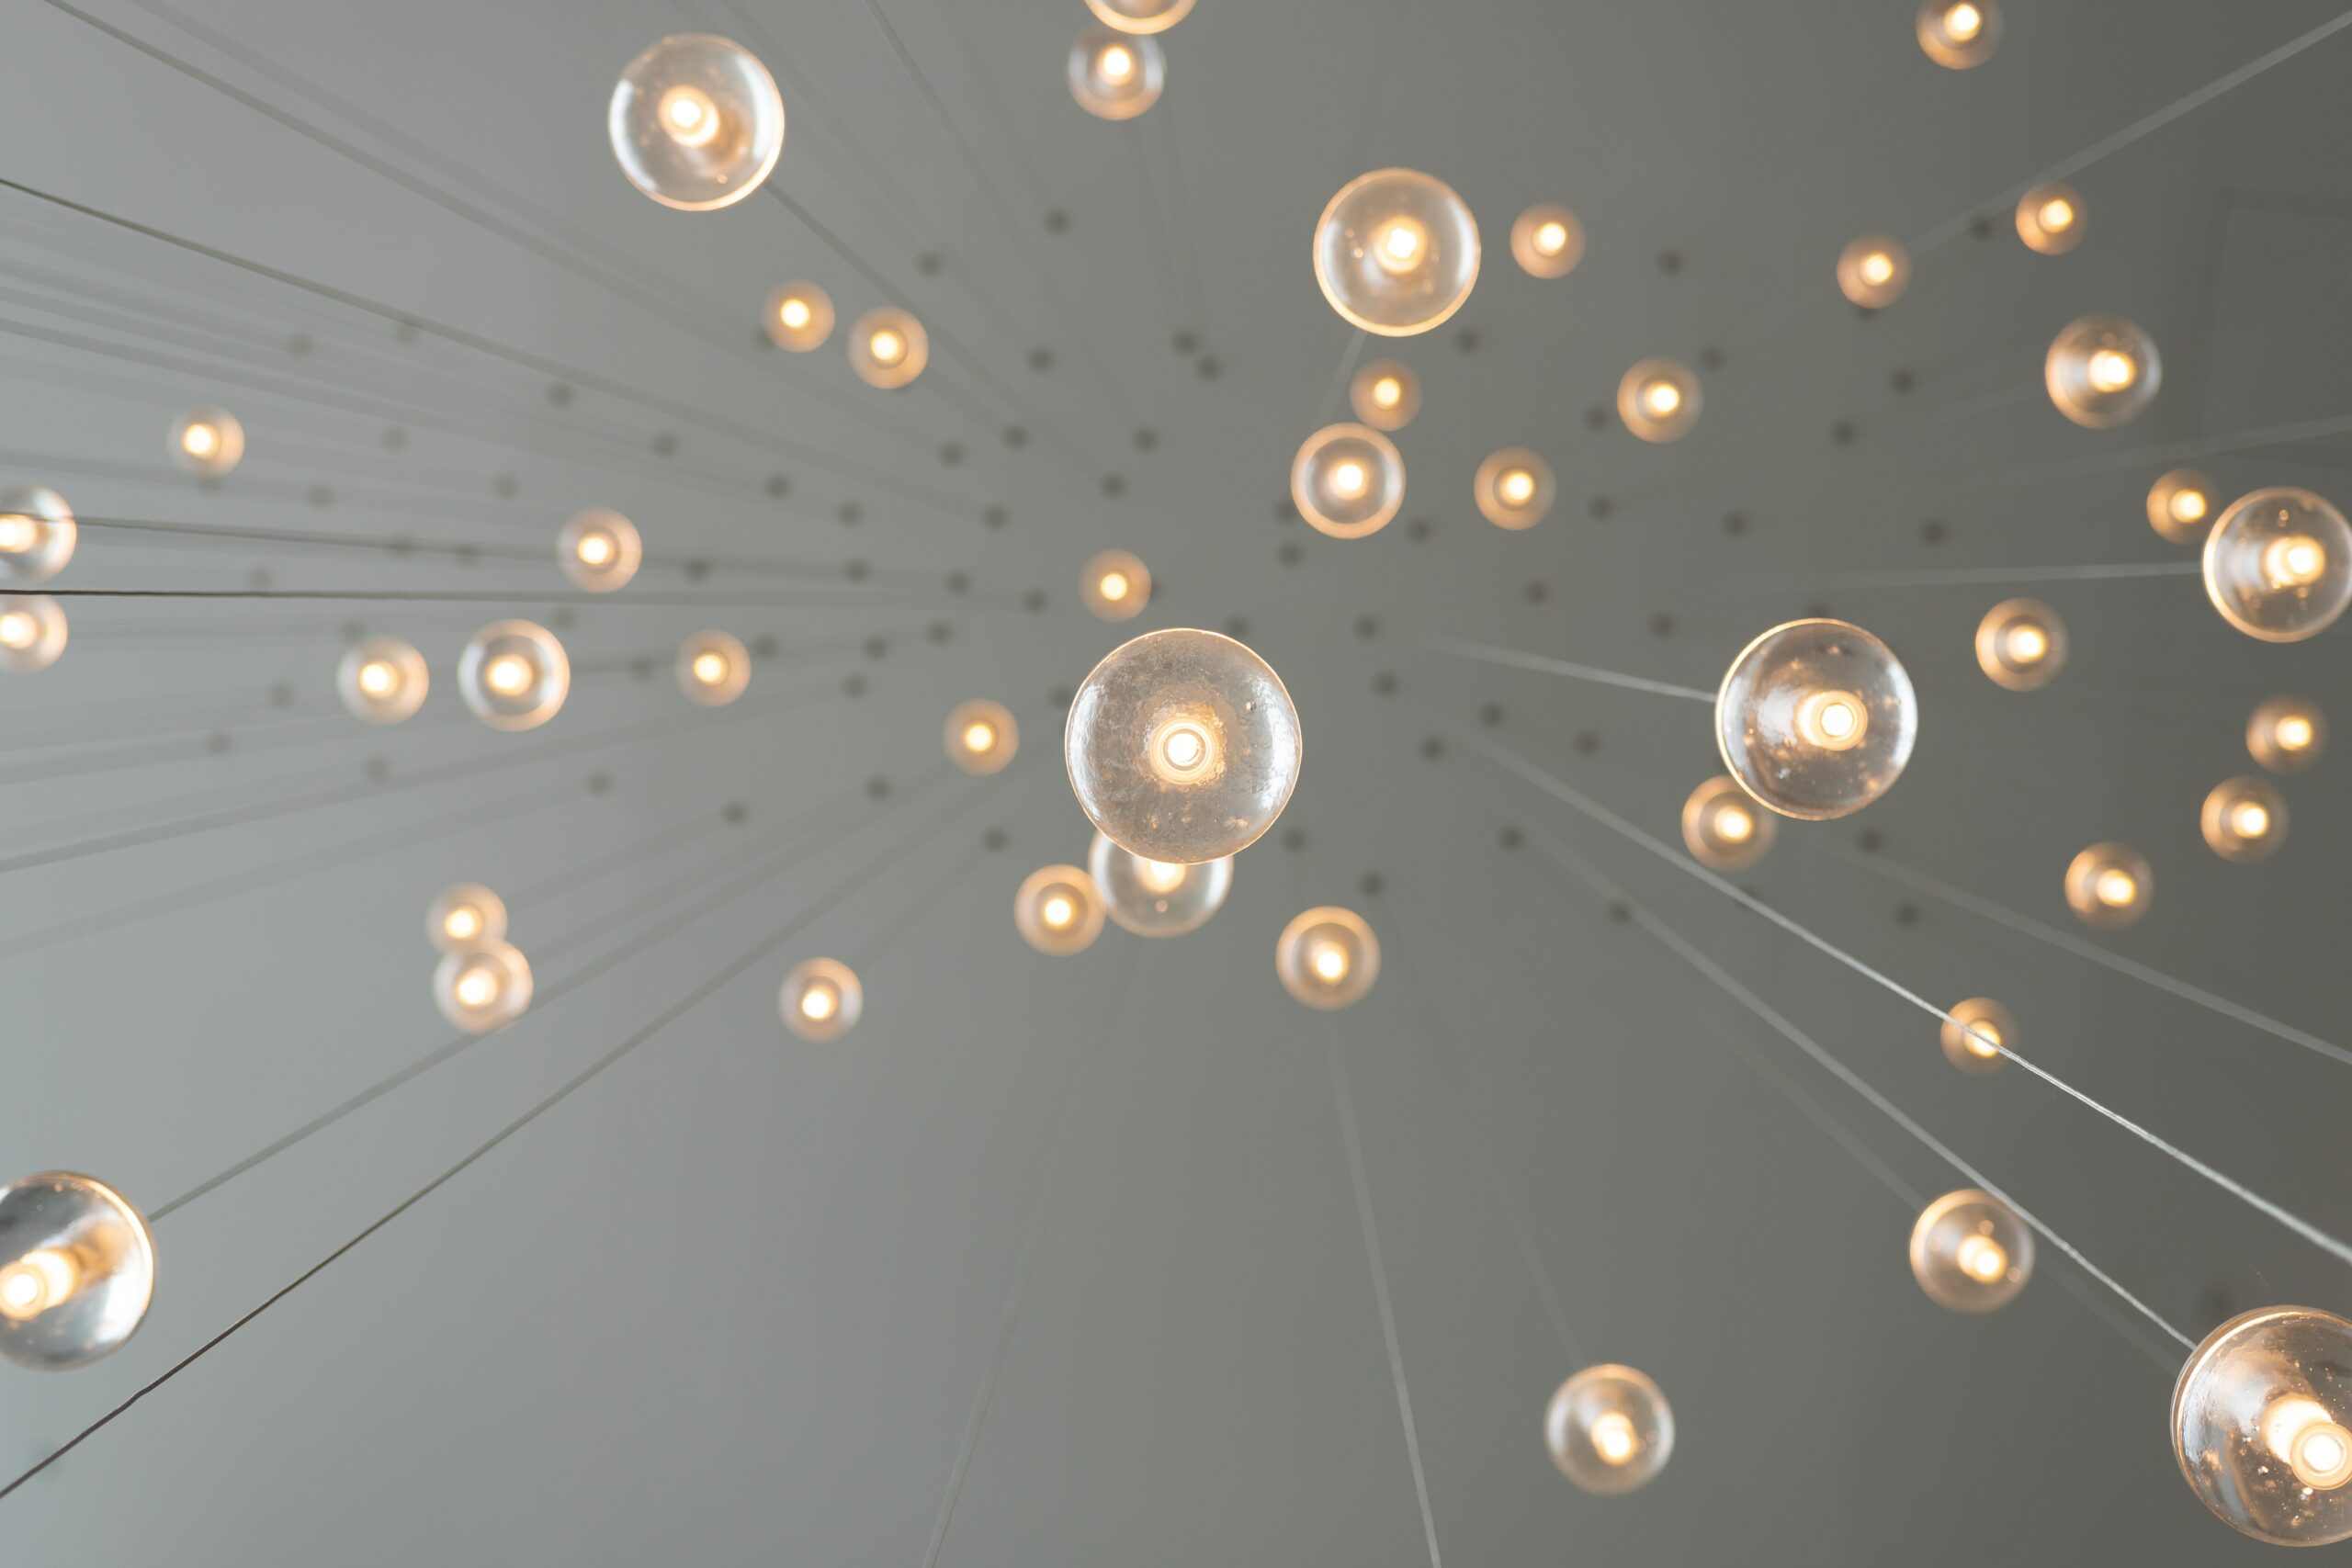 Lightbulbs hanging from the ceiling on barely-visible strings | UiPath clipboard AI